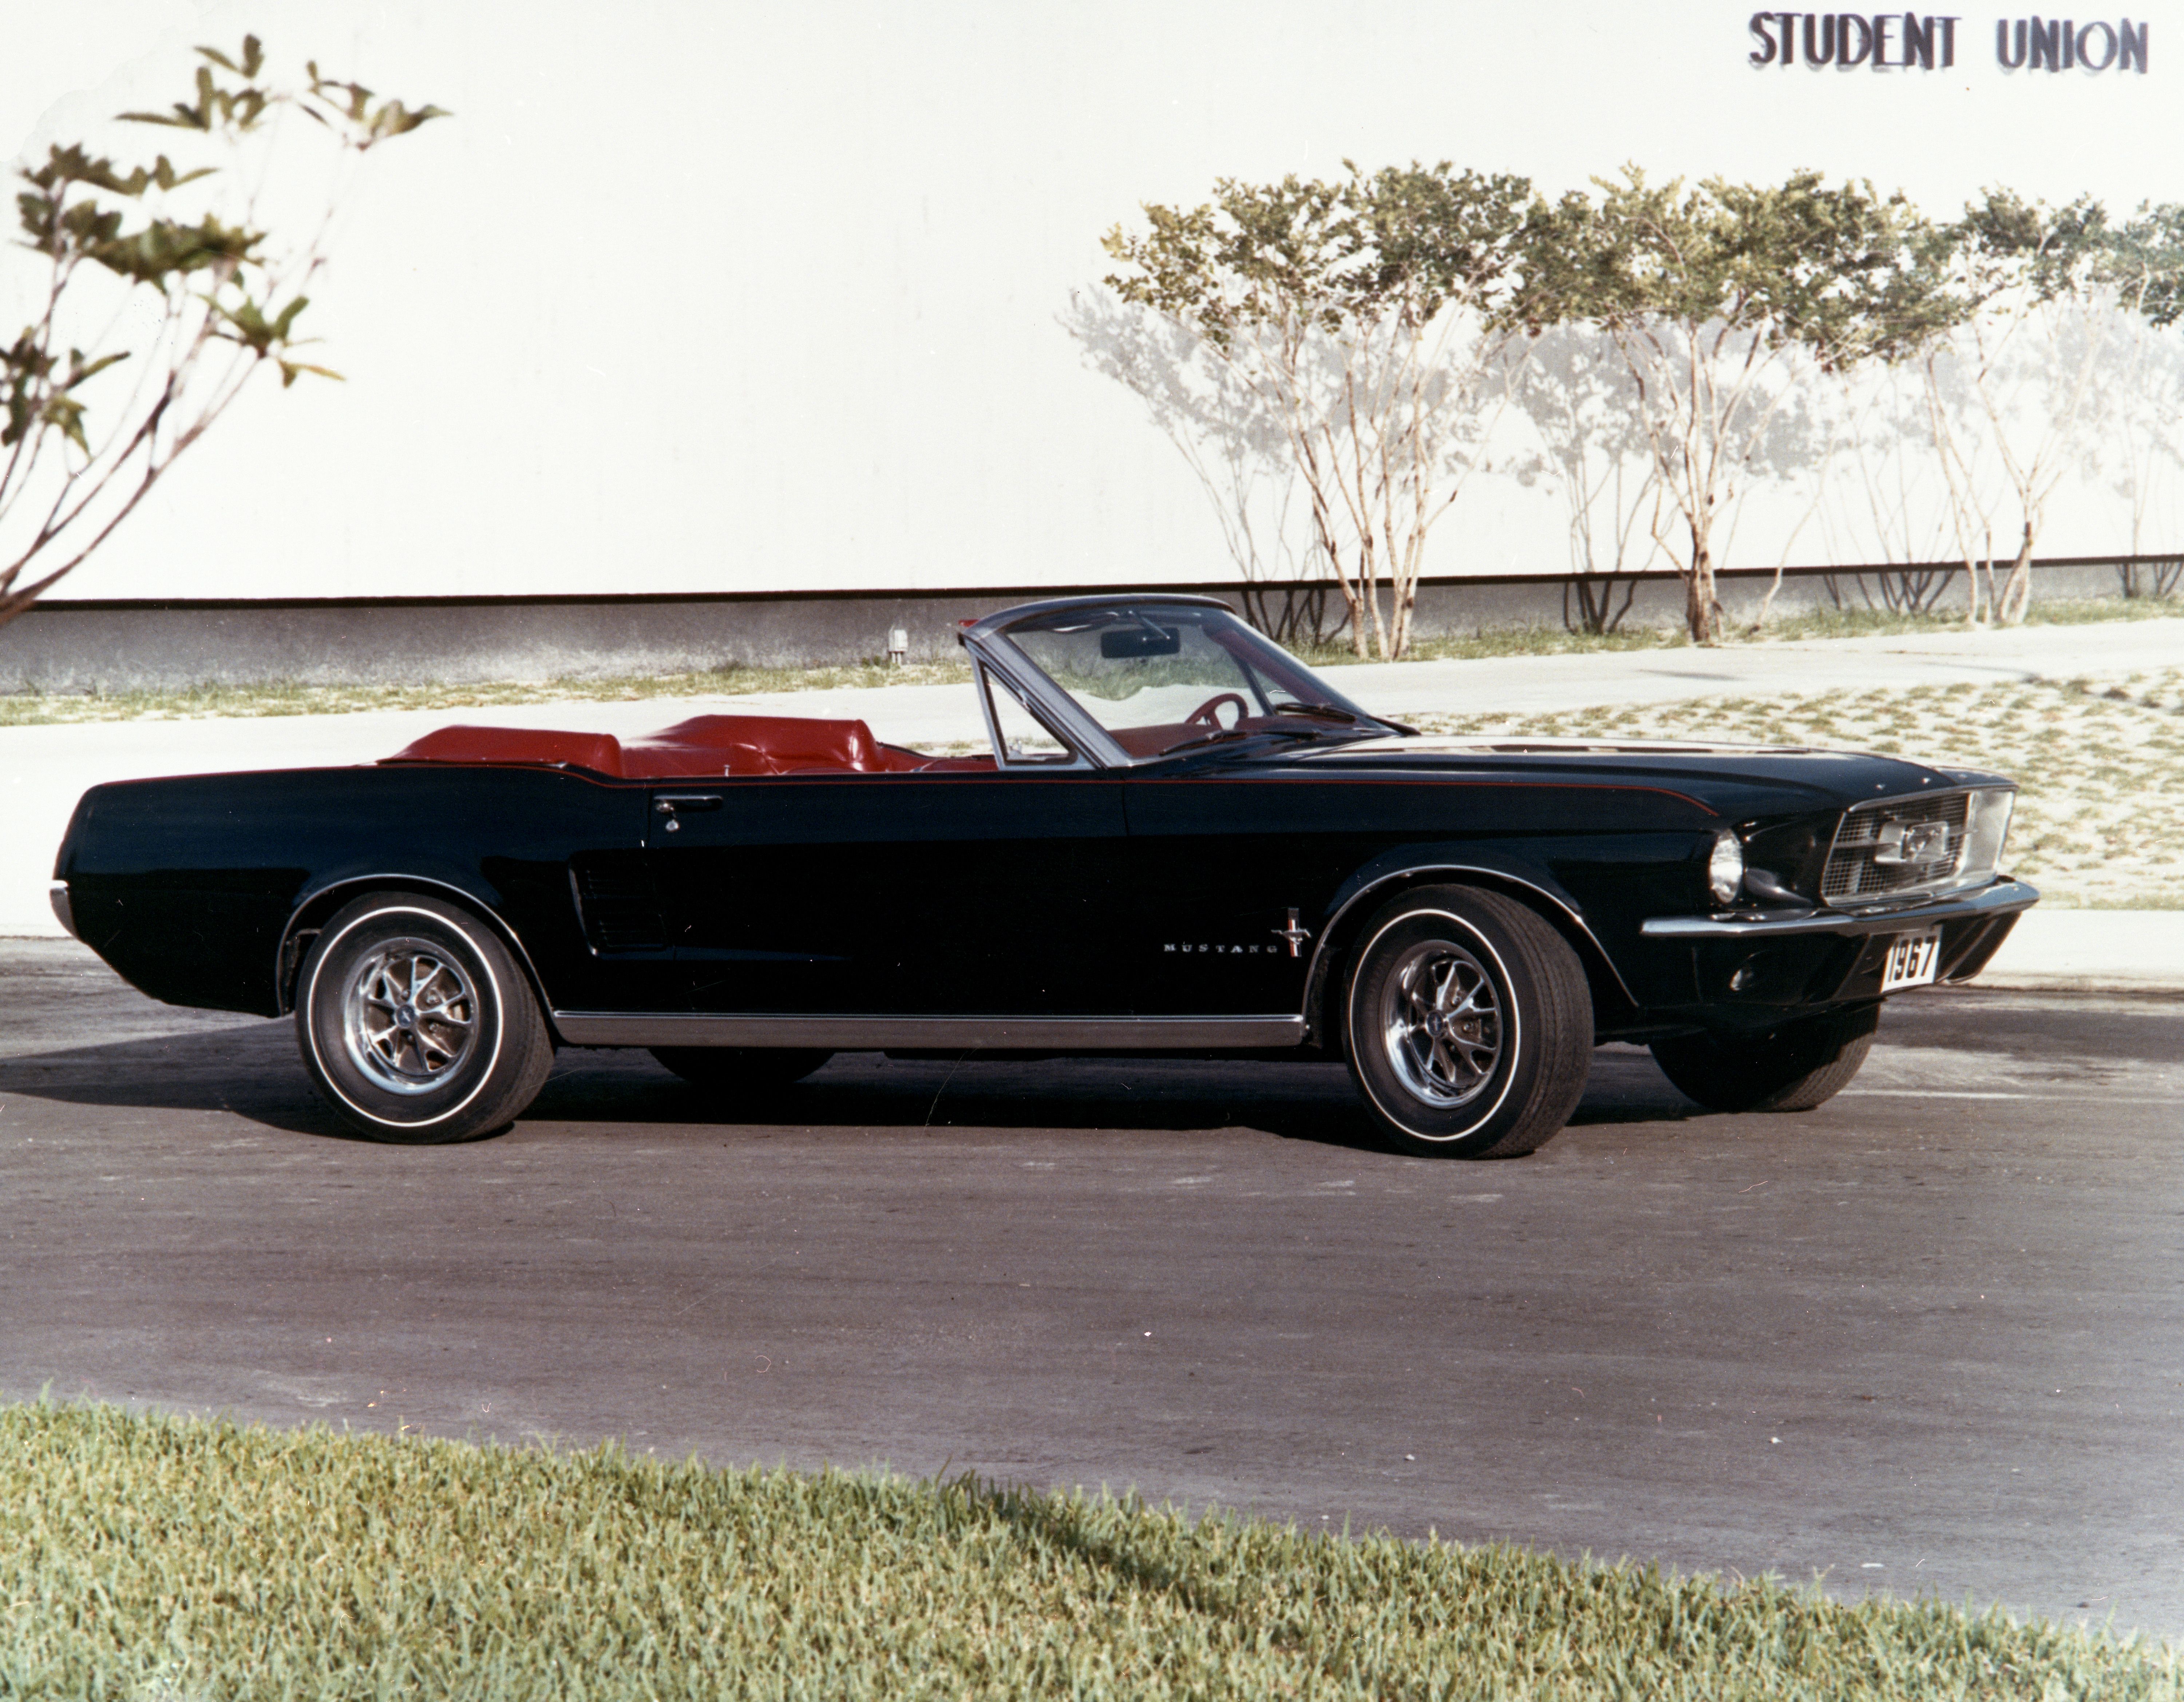 A classic black Ford Mustang convertible